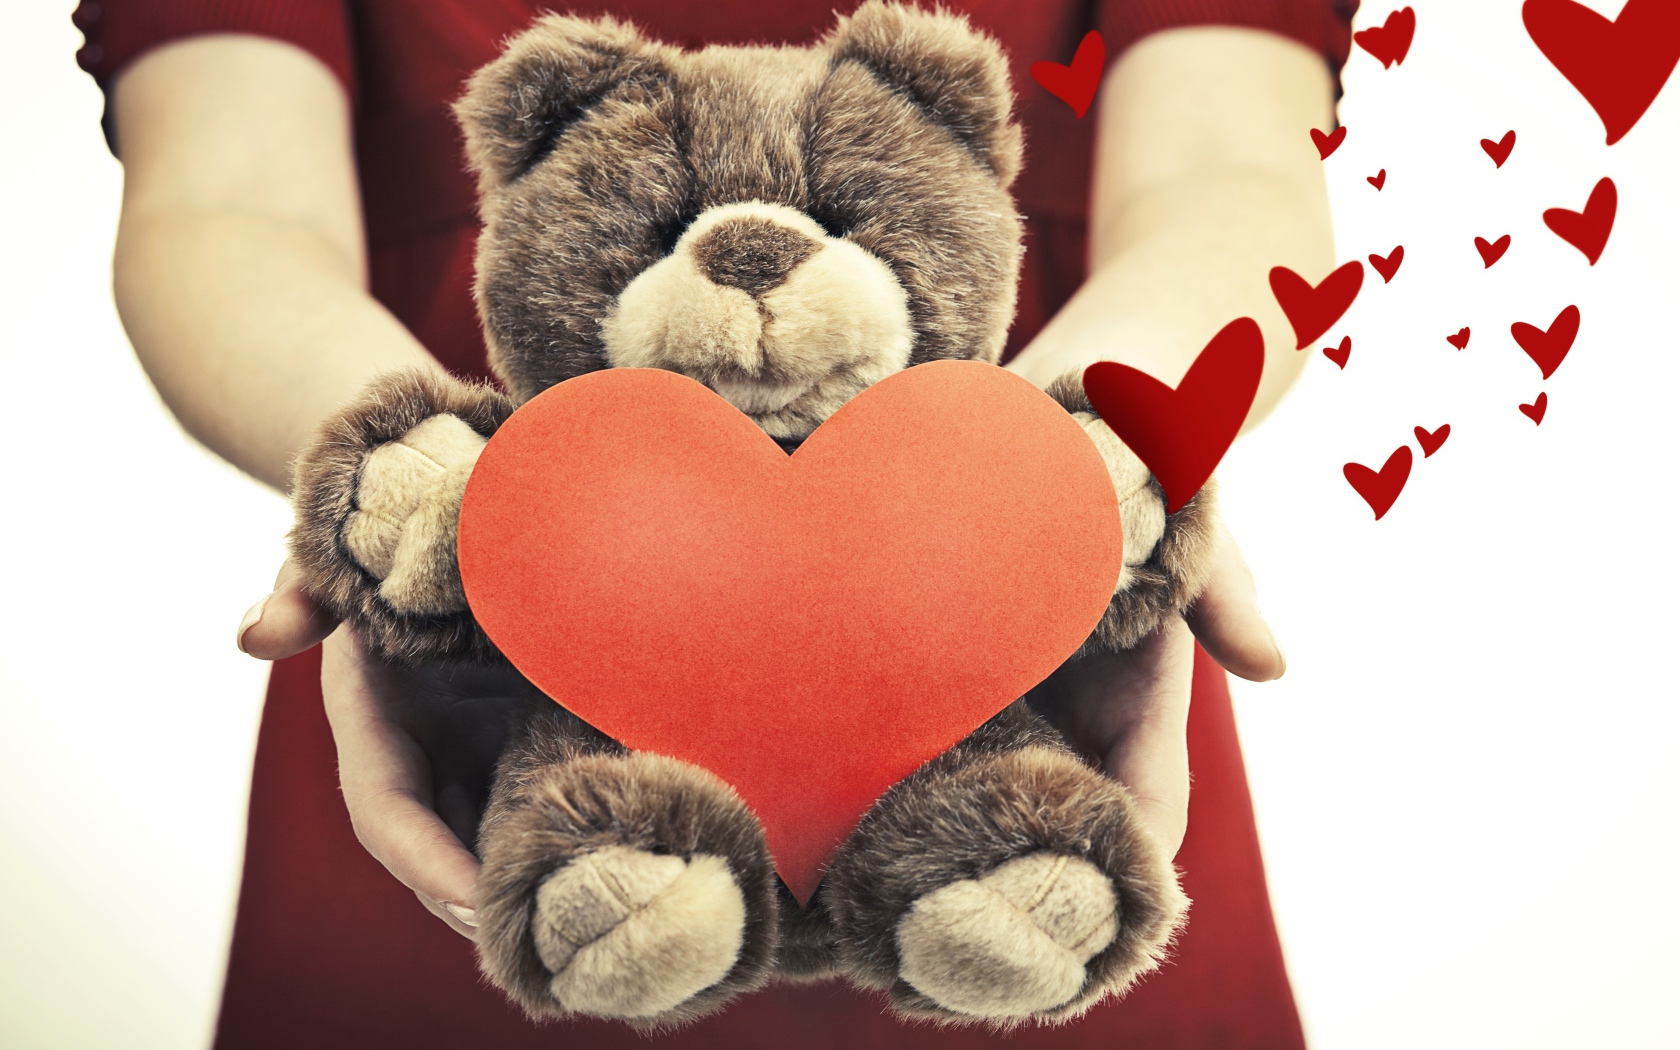 Plush bear with a big red heart in his hands